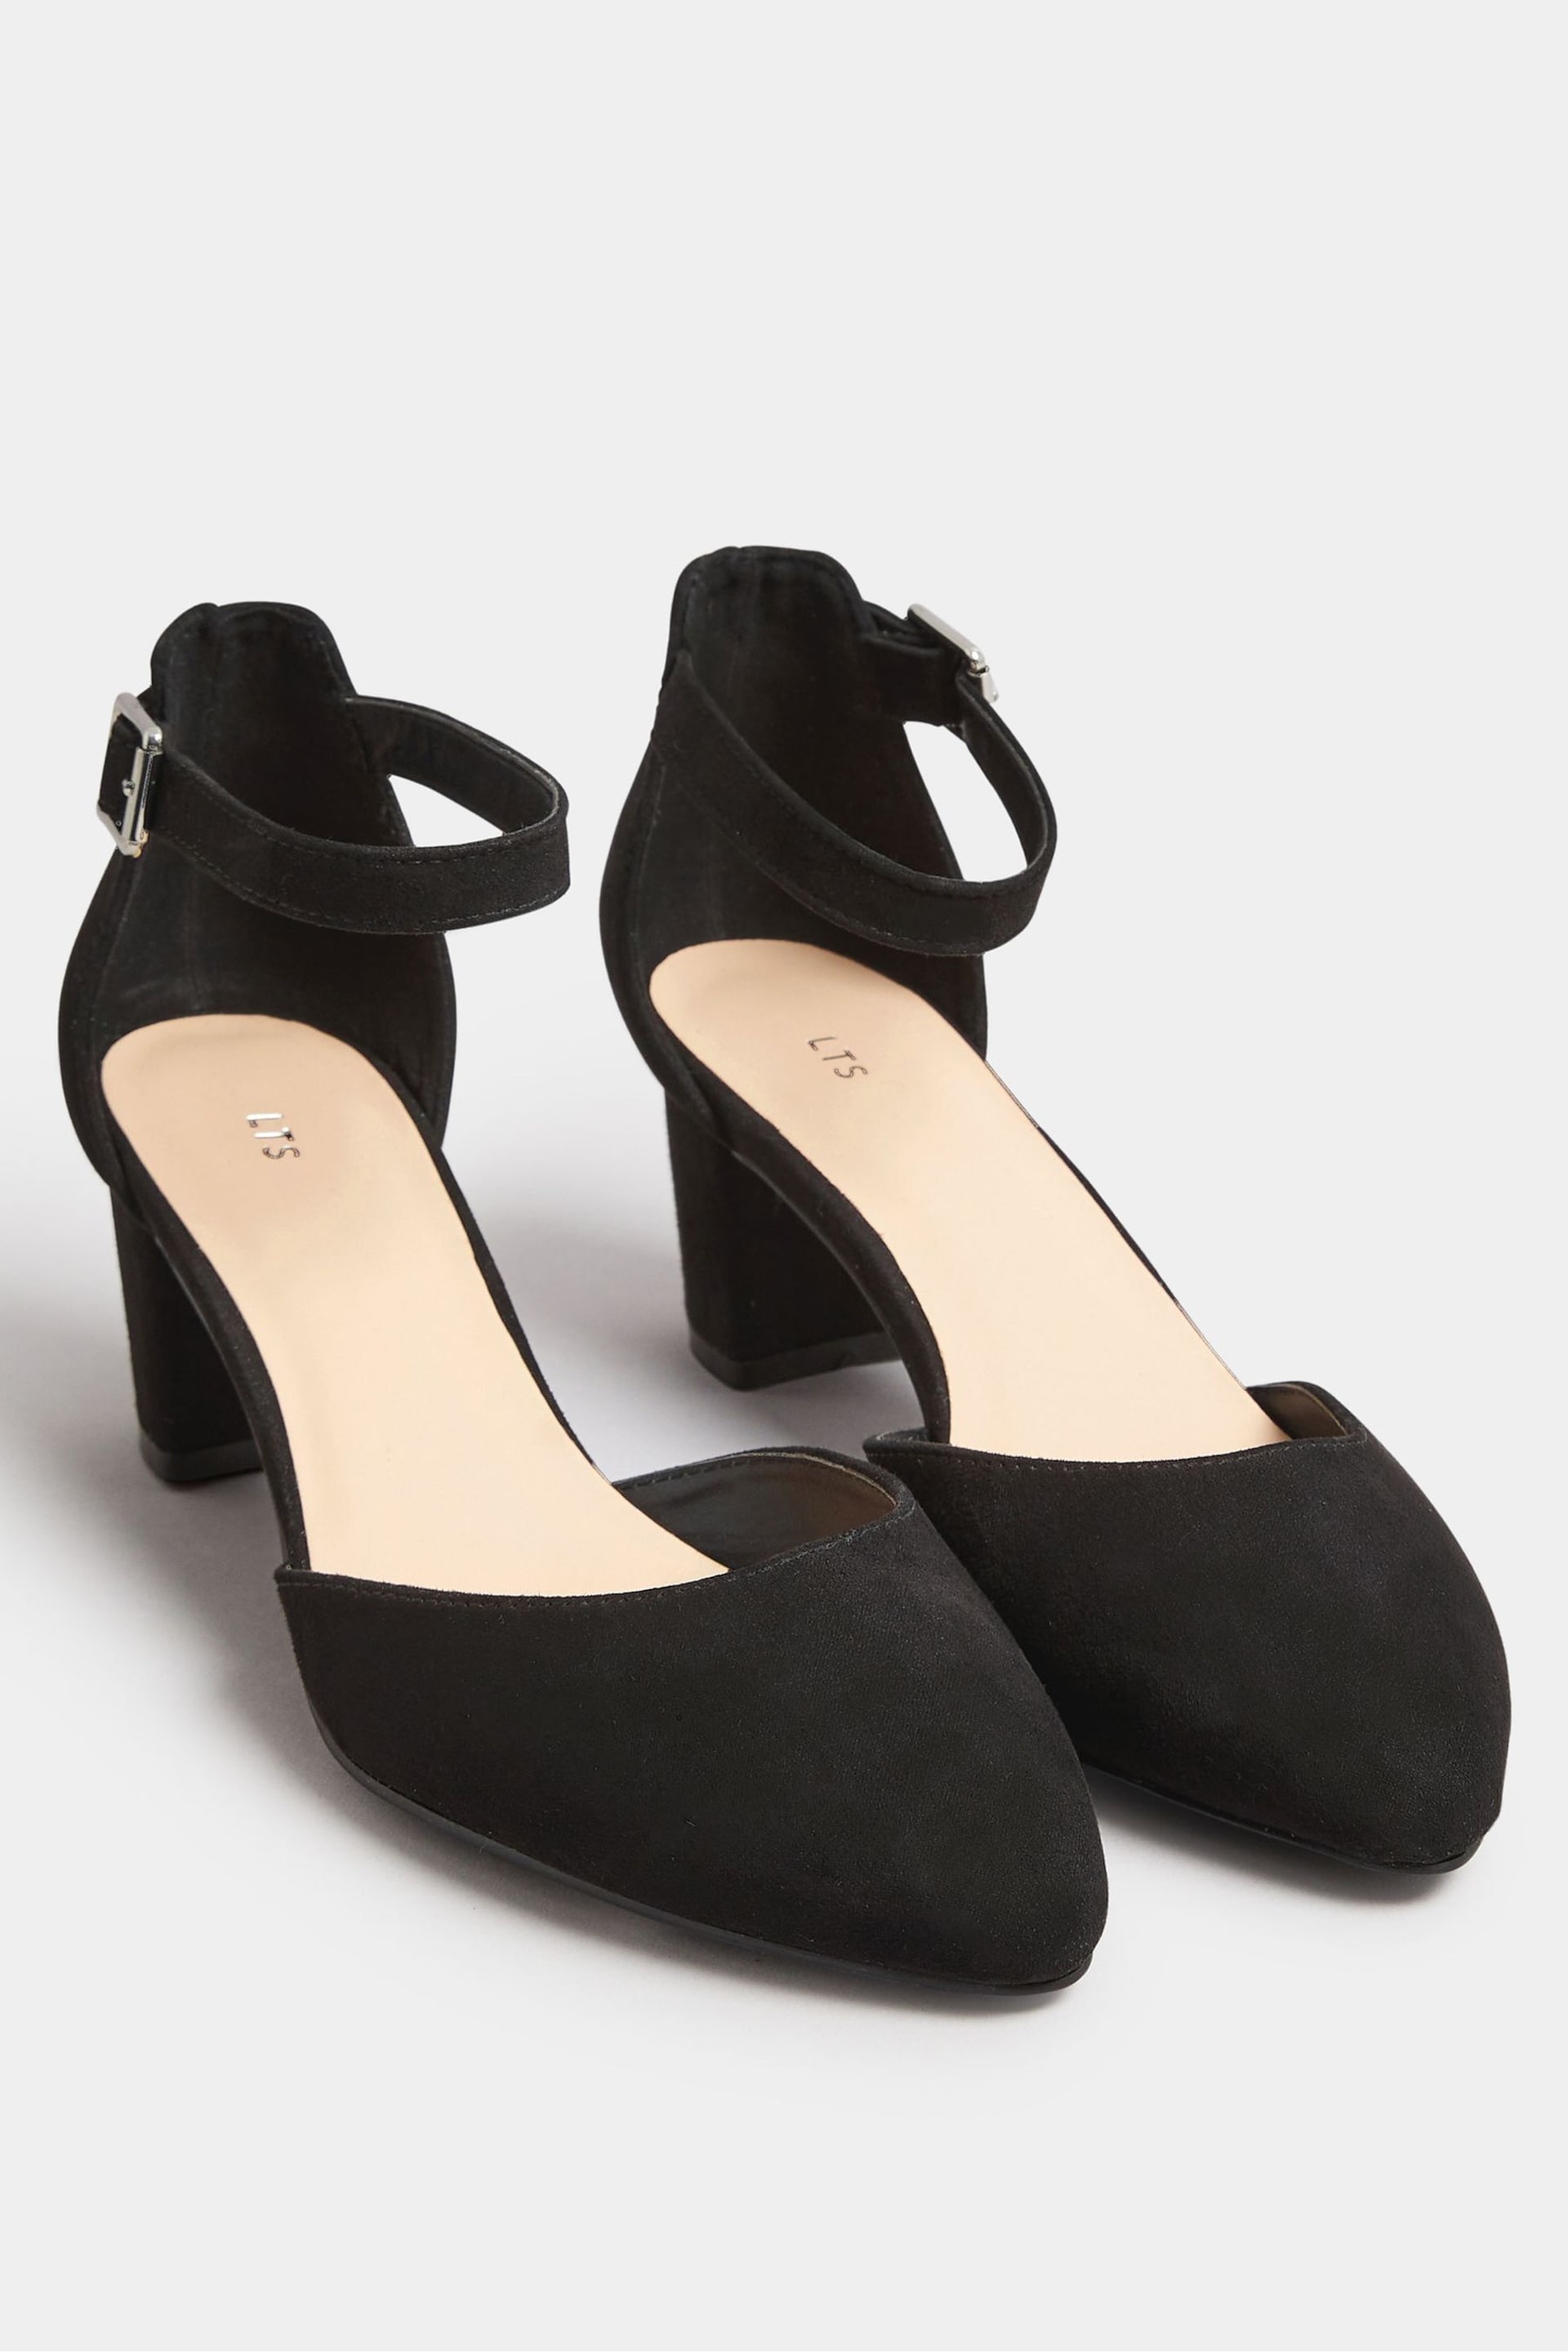 Long Tall Sally Black Micro Point Two Part Mid Heels - Image 3 of 5